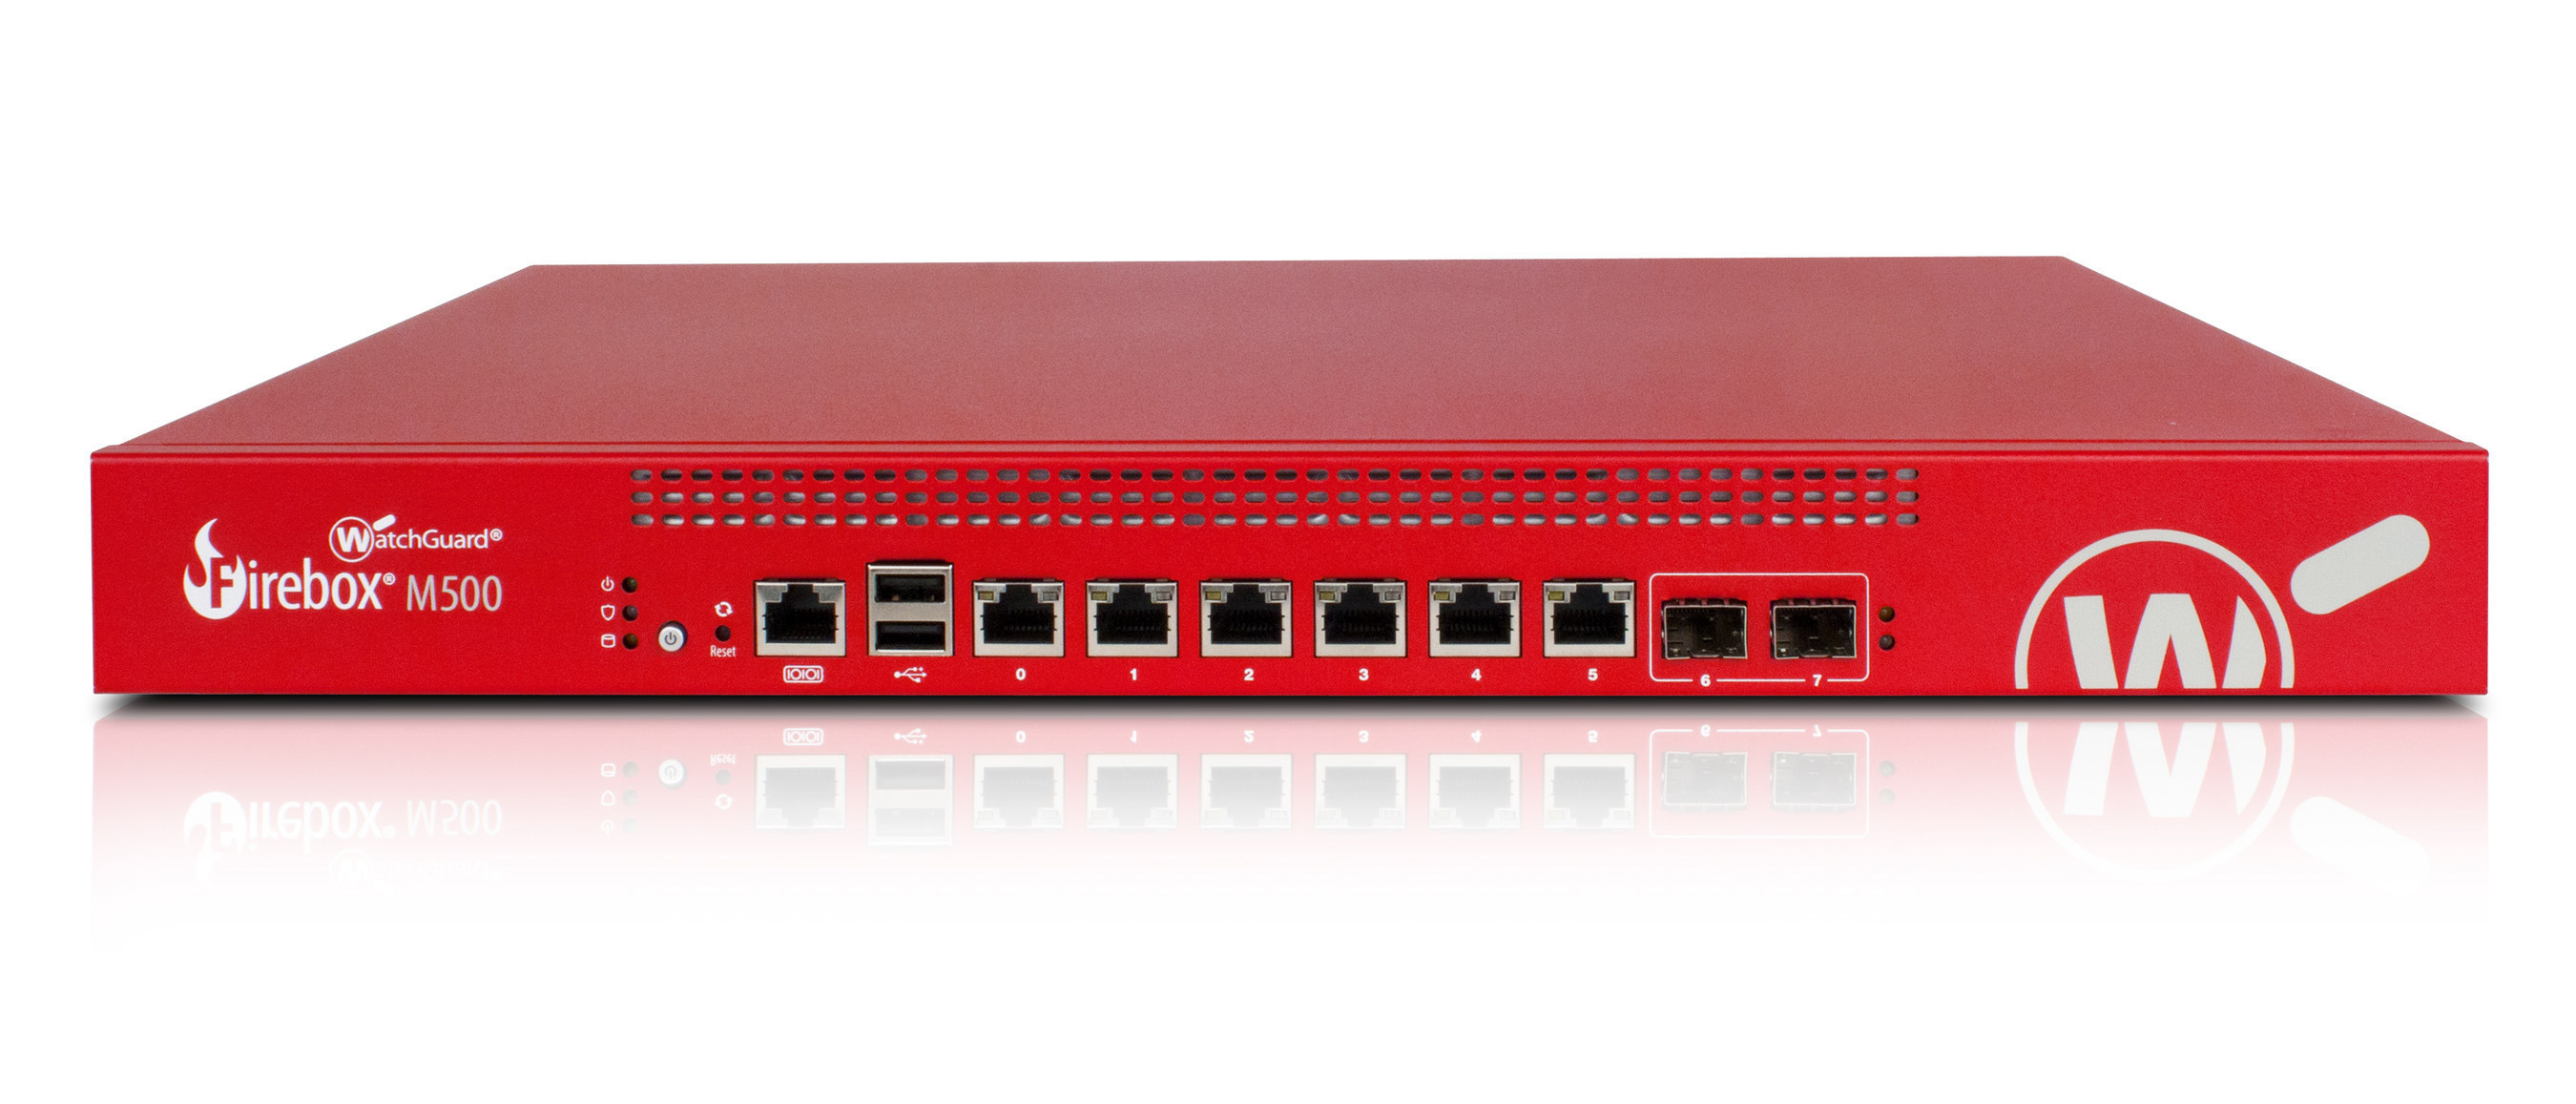 Cyber criminals are using encrypted traffic to bypass security. Businesses need security that can deconstruct encrypted traffic and expose the sinister malware within - without compromising performance. WatchGuard's new Firebox M500 security appliance outperforms the competition, inspecting HTTPS traffic up to 149% faster.